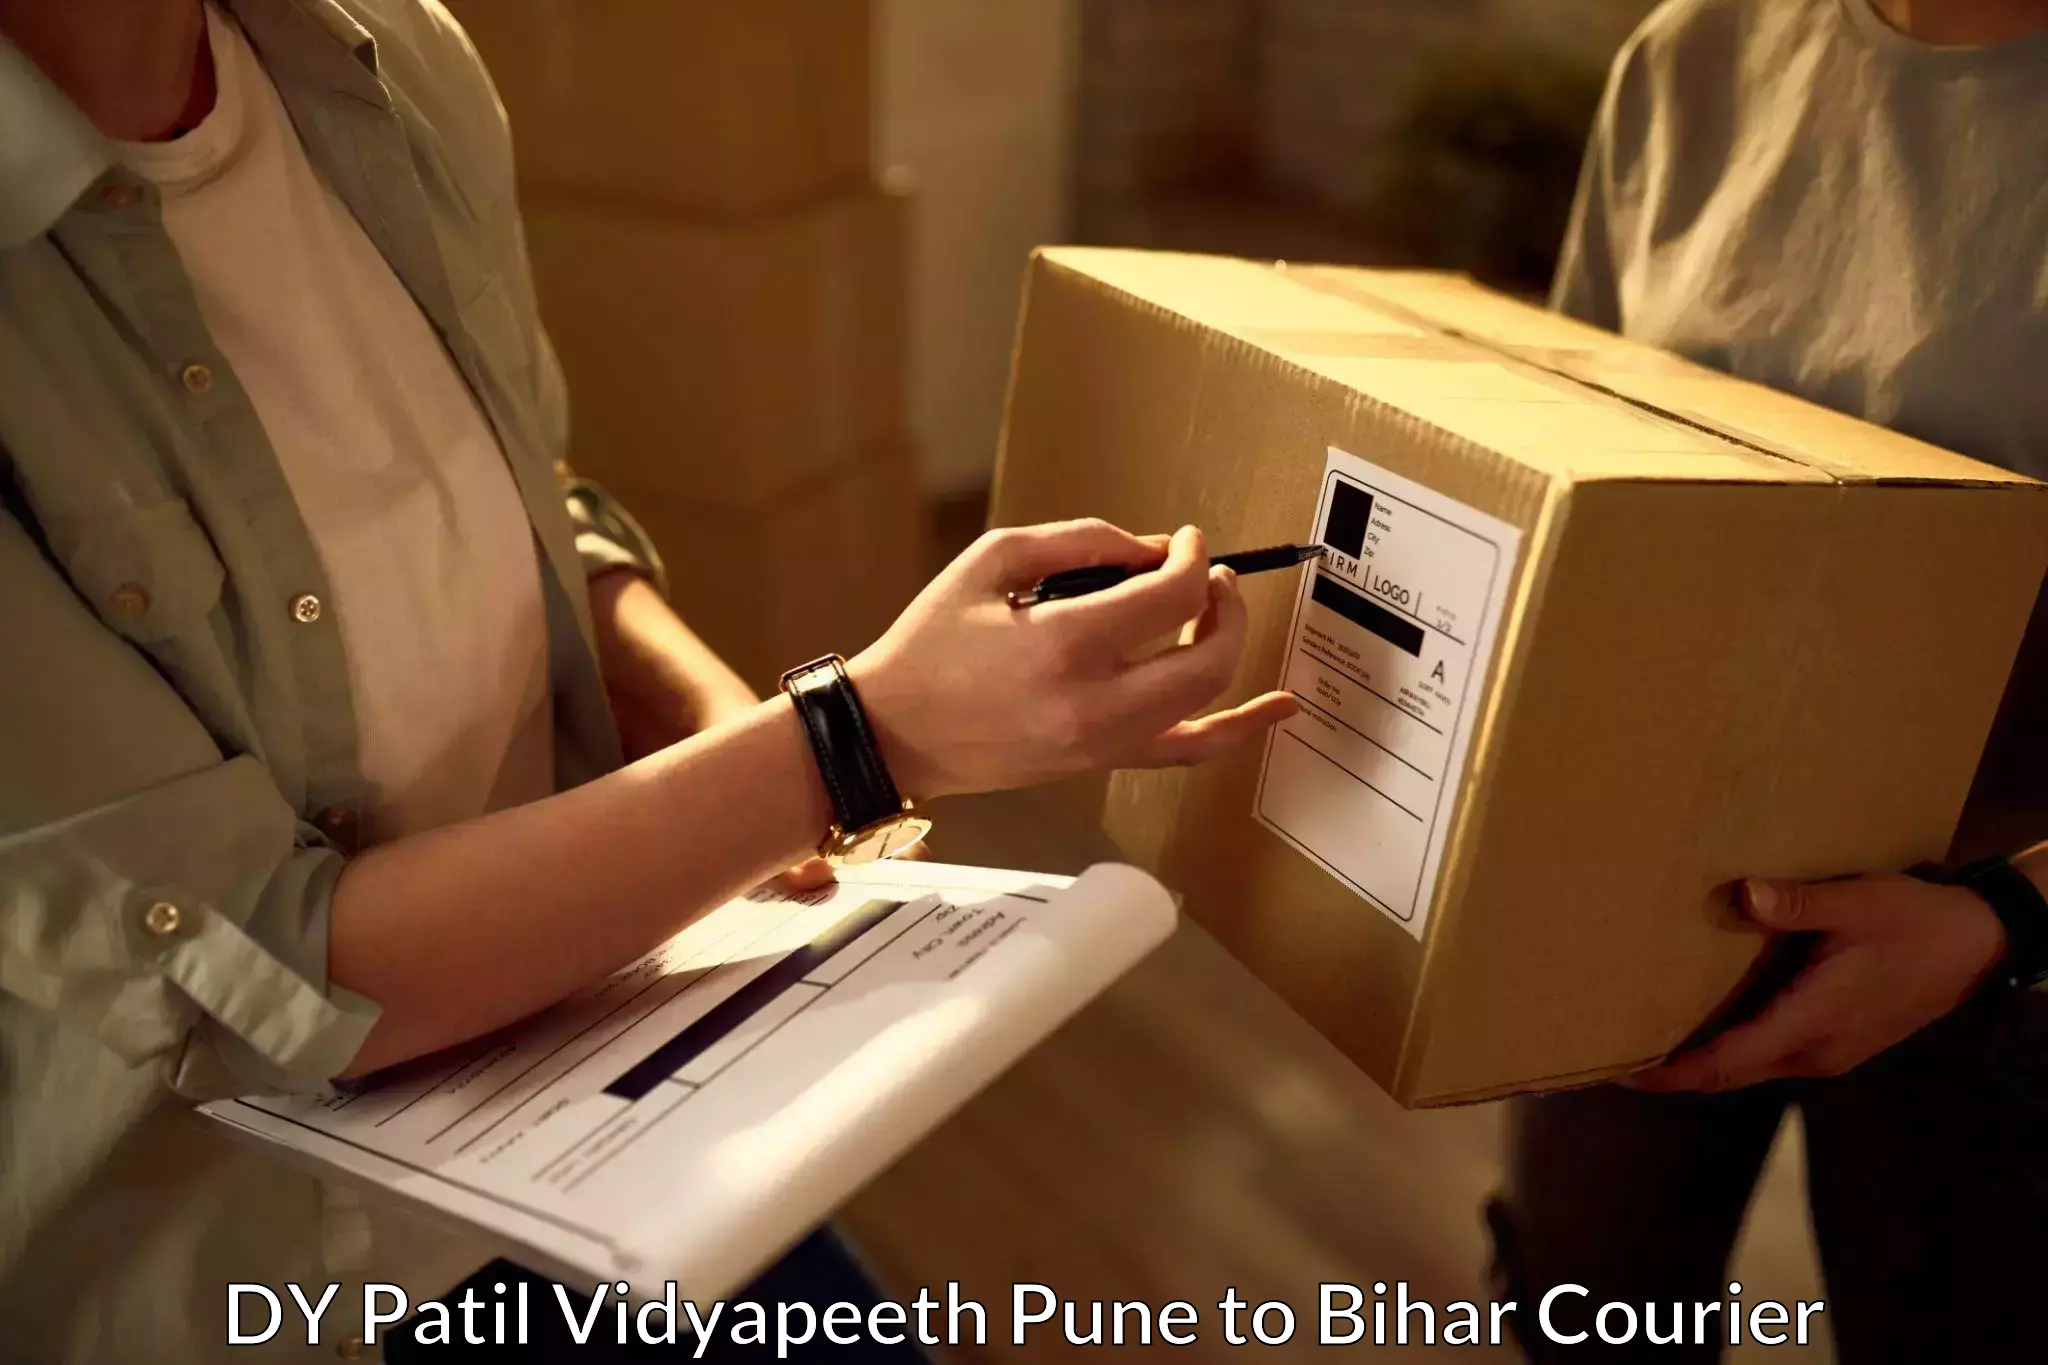 High value parcel delivery DY Patil Vidyapeeth Pune to Kuchaikote